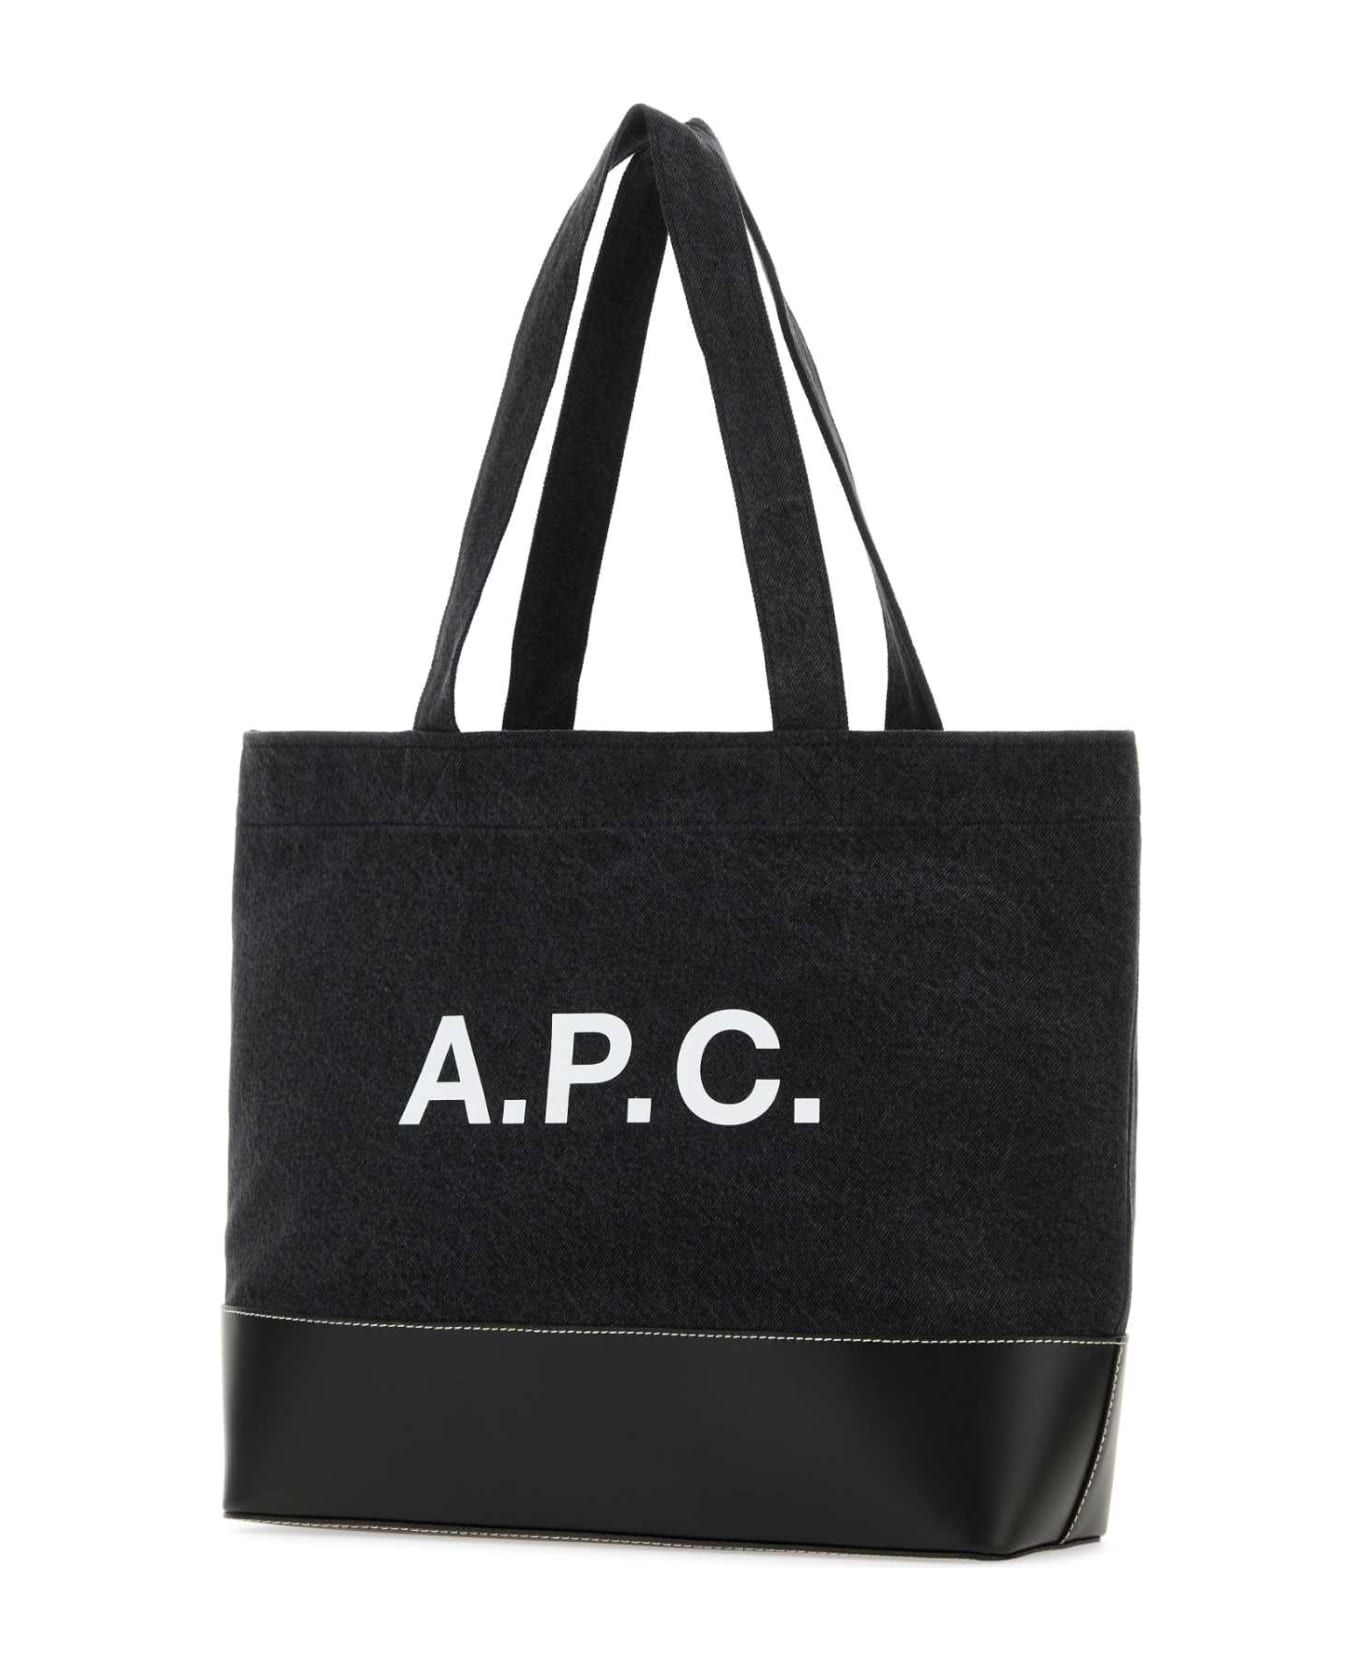 A.P.C. Black Denim And Leather Shopping Bag - Black トートバッグ